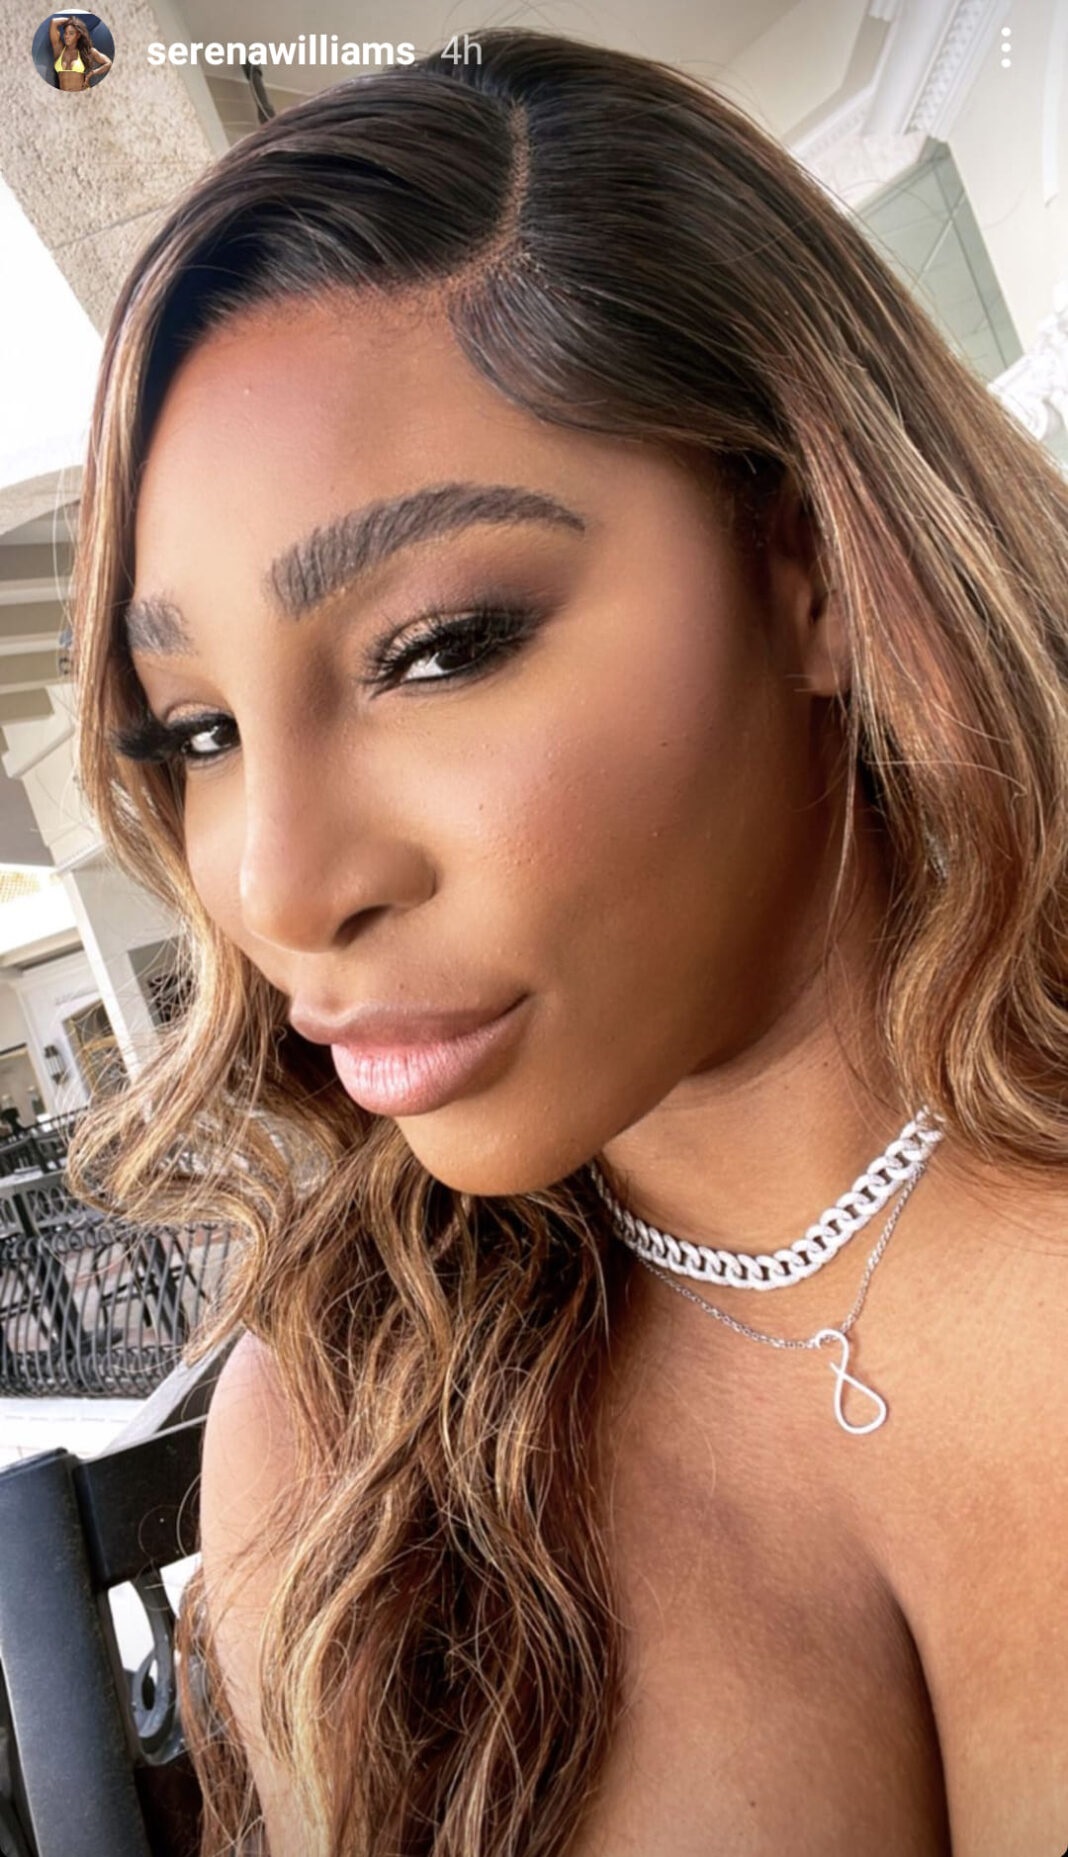 Serena Williams leaves fans speechless in gorgeous fitted dress